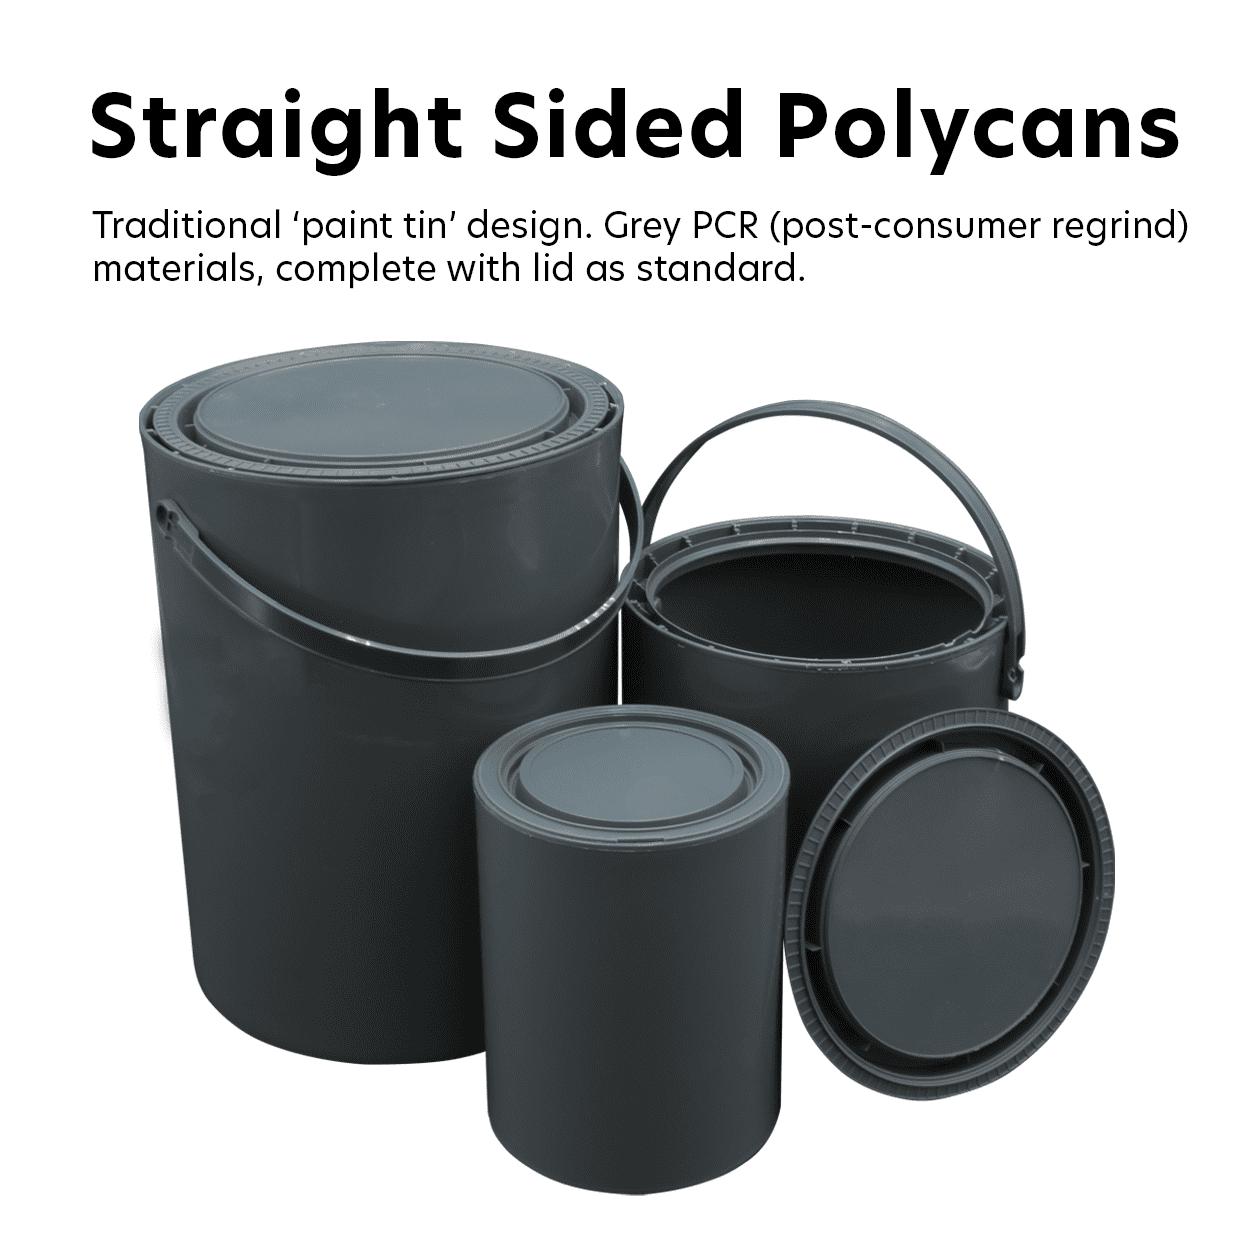 Straight Sided Polycans